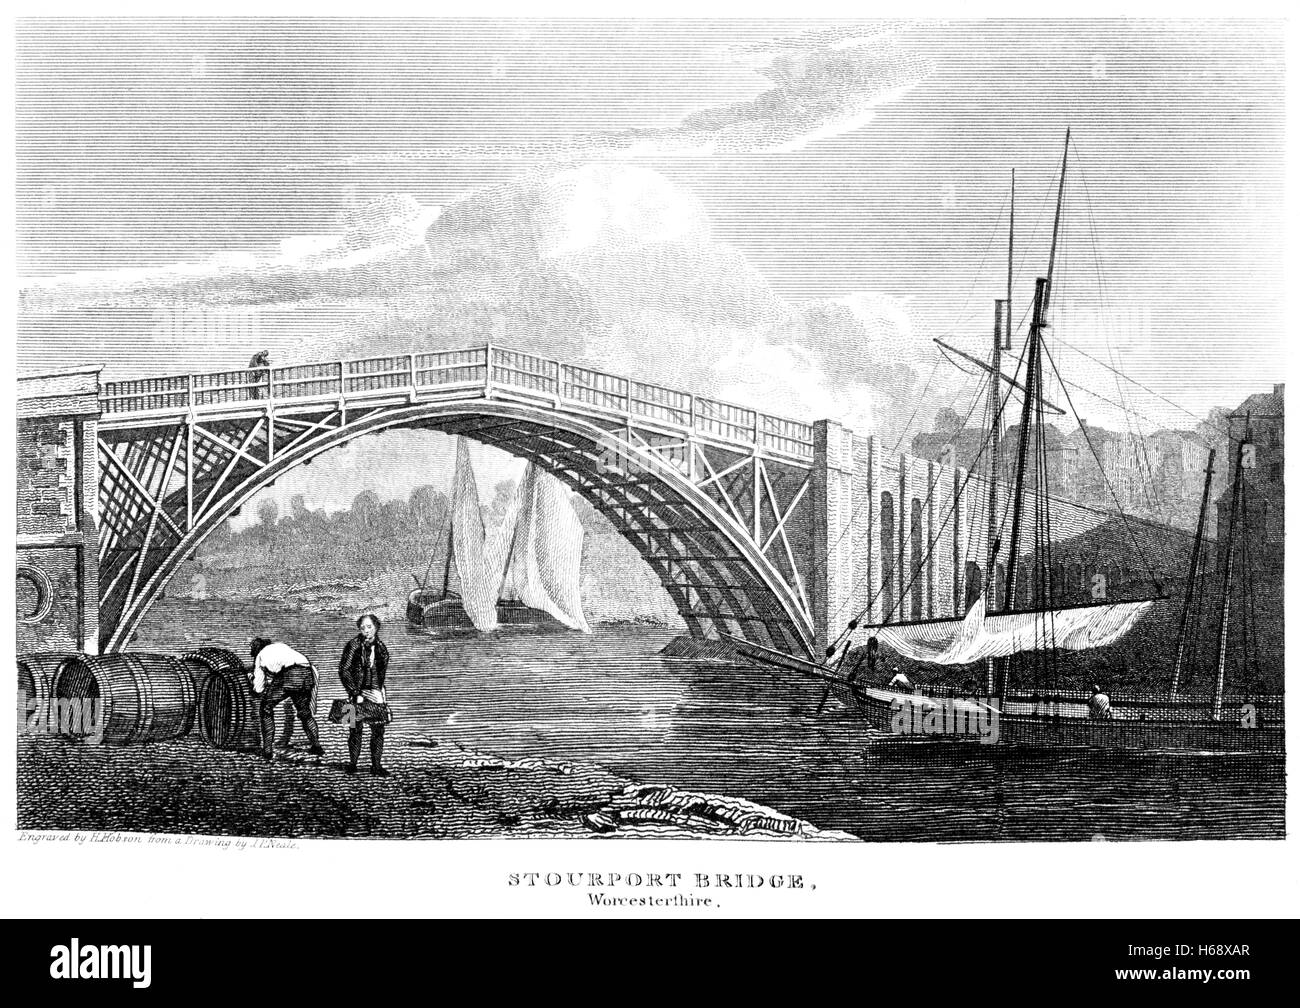 An engraving of Stourport Bridge, Worcestershire scanned at high resolution from a book printed in 1812. Believed copyright free. Stock Photo